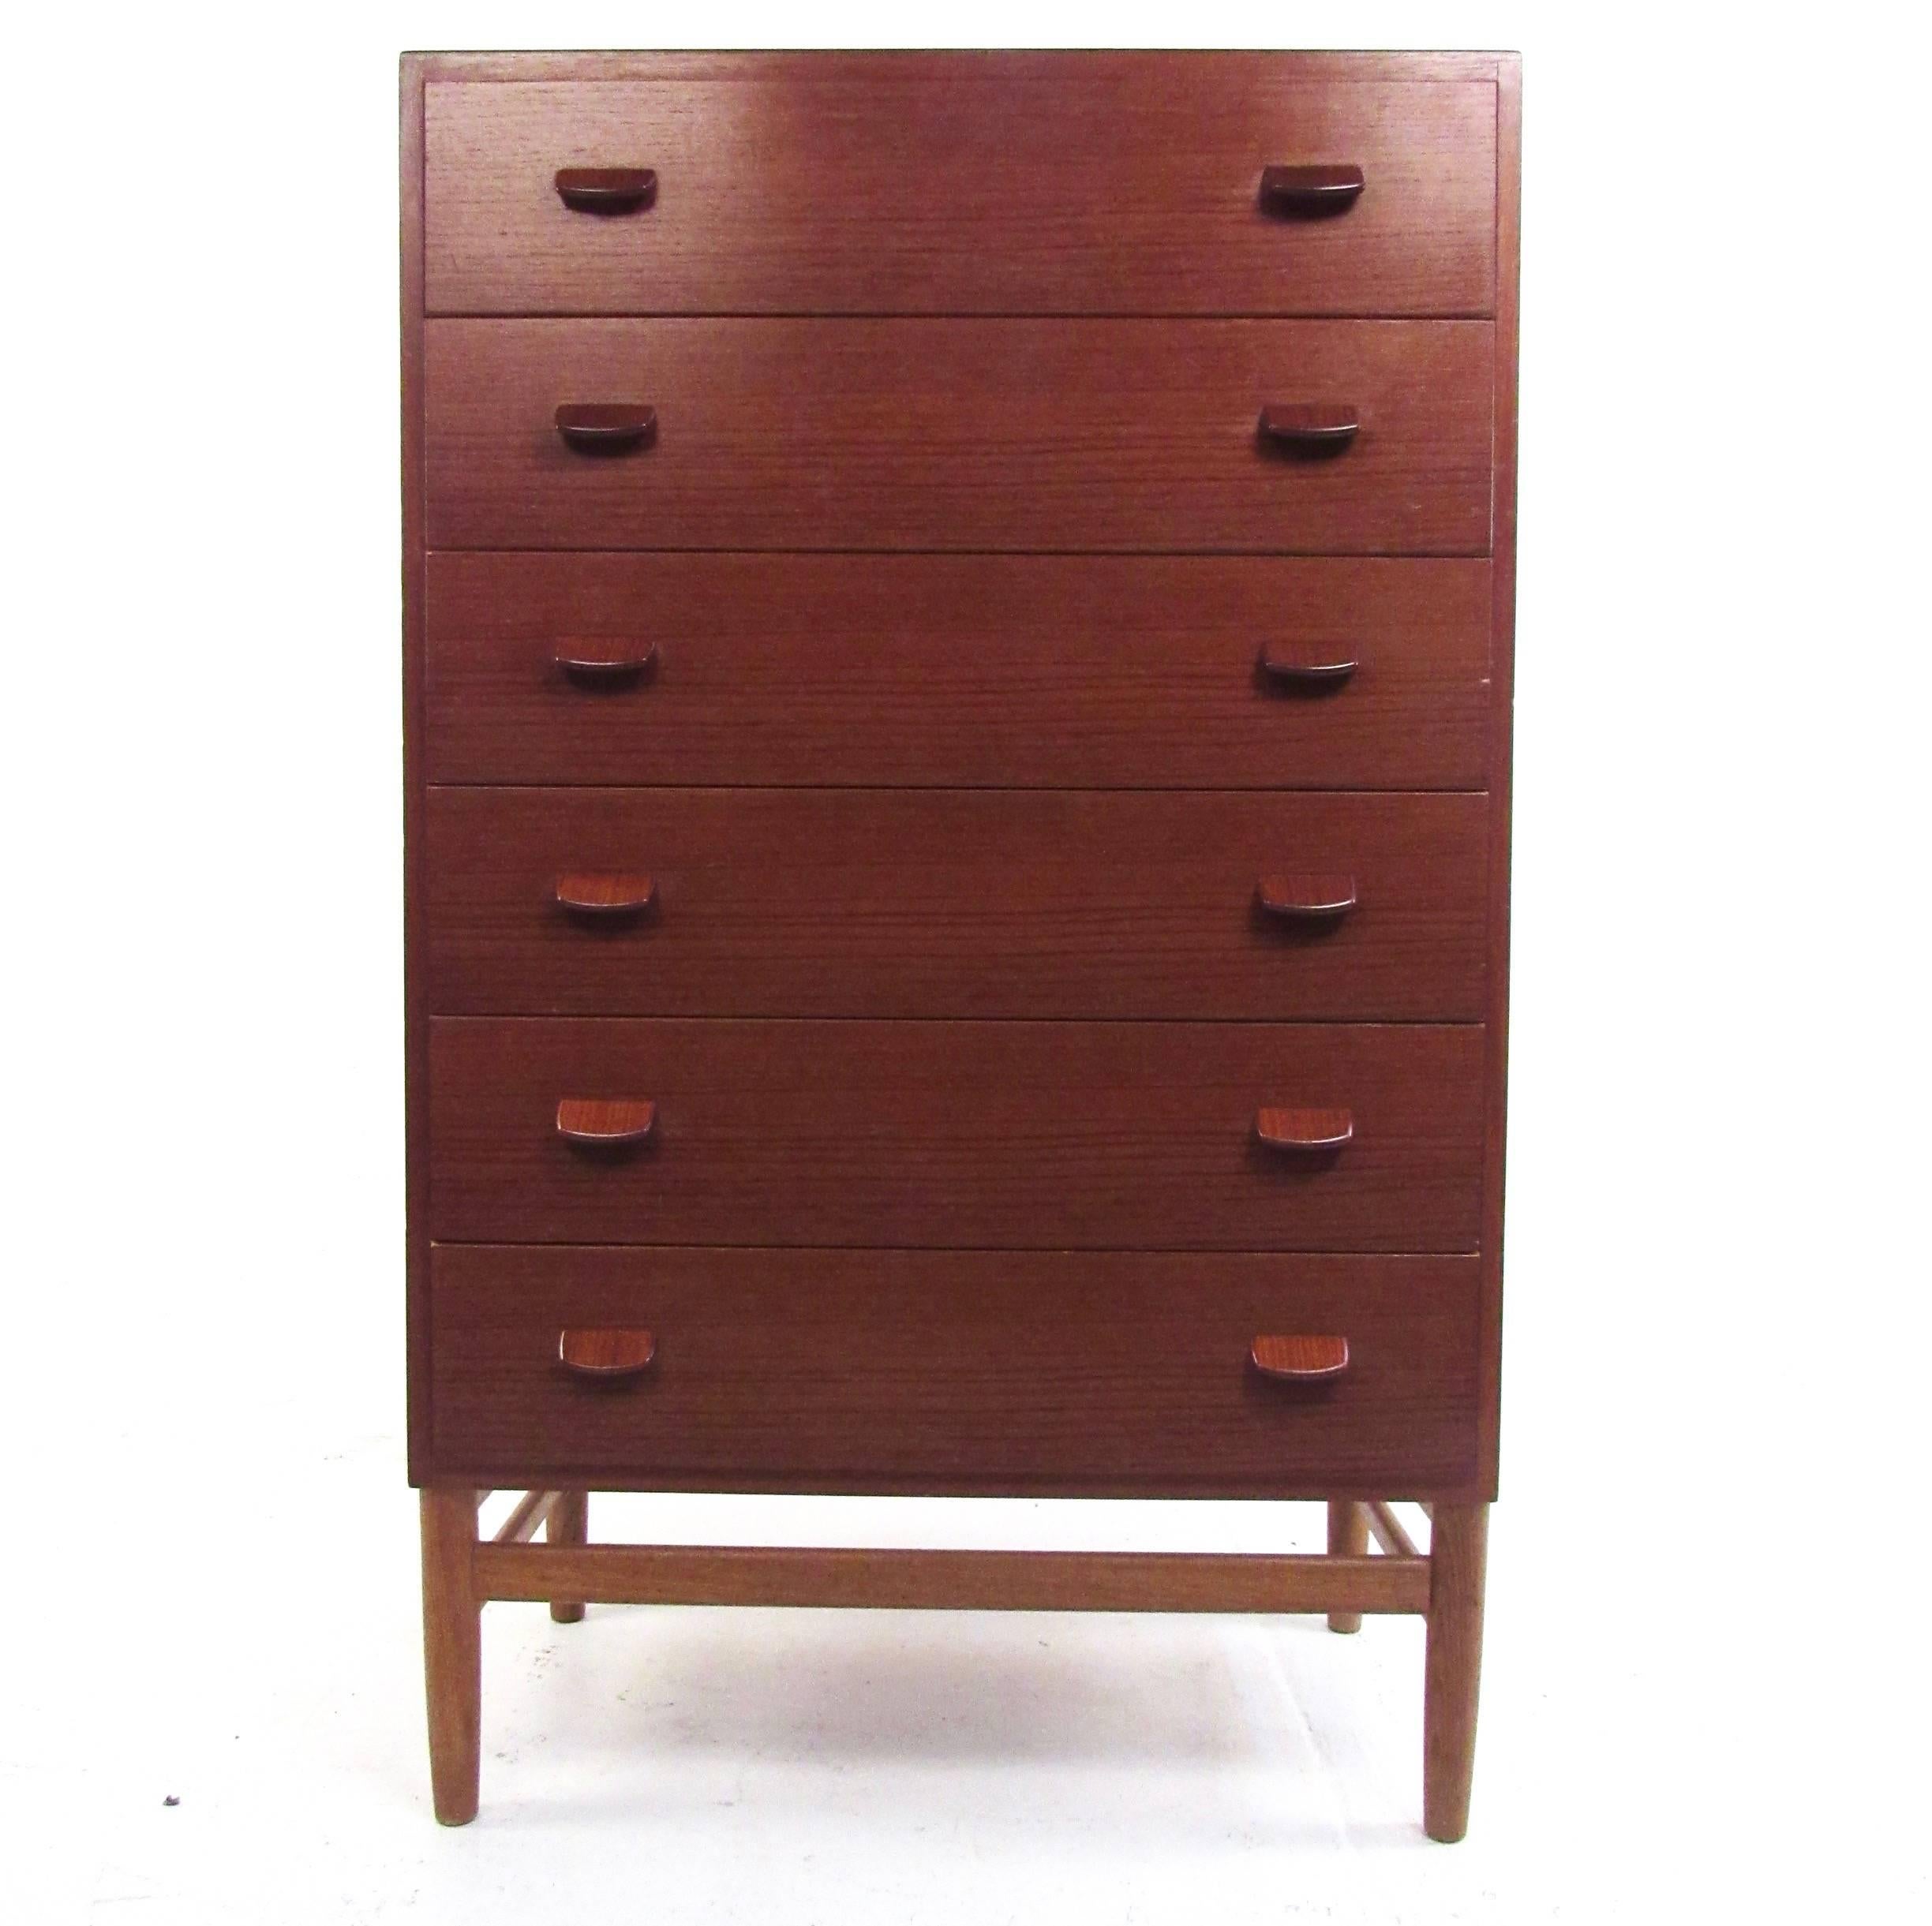 This vintage modern teak dresser features dovetail hardwood drawers with unique carved pulls. Four leg base features tapered stretchers for added stability, while the beautiful Mid-Century teak finish makes a visually impressive addition to any